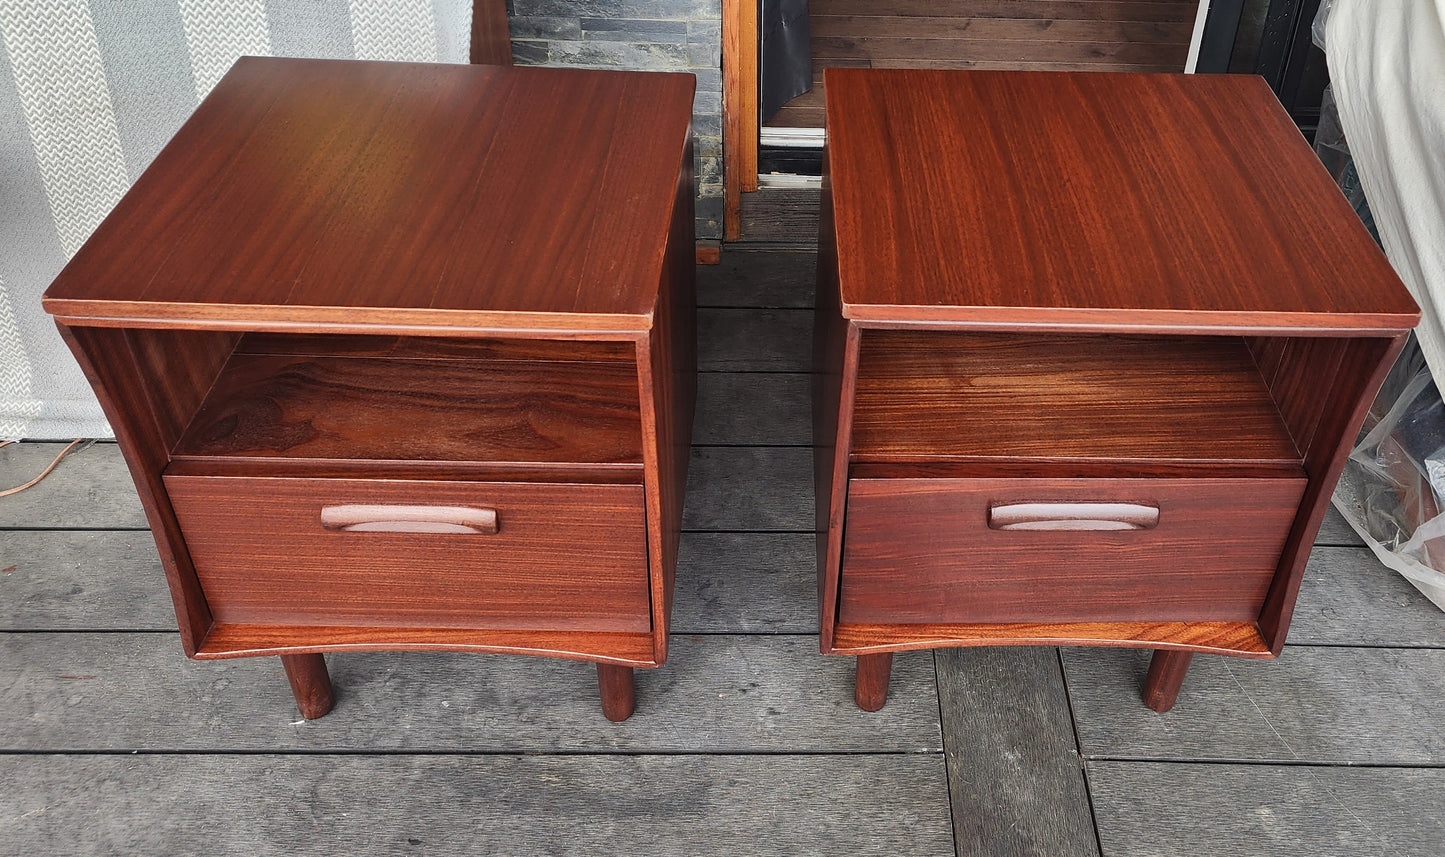 2 REFINISHED Mid Century Modern Solid Teak Afromosia Nightstands by Imperial